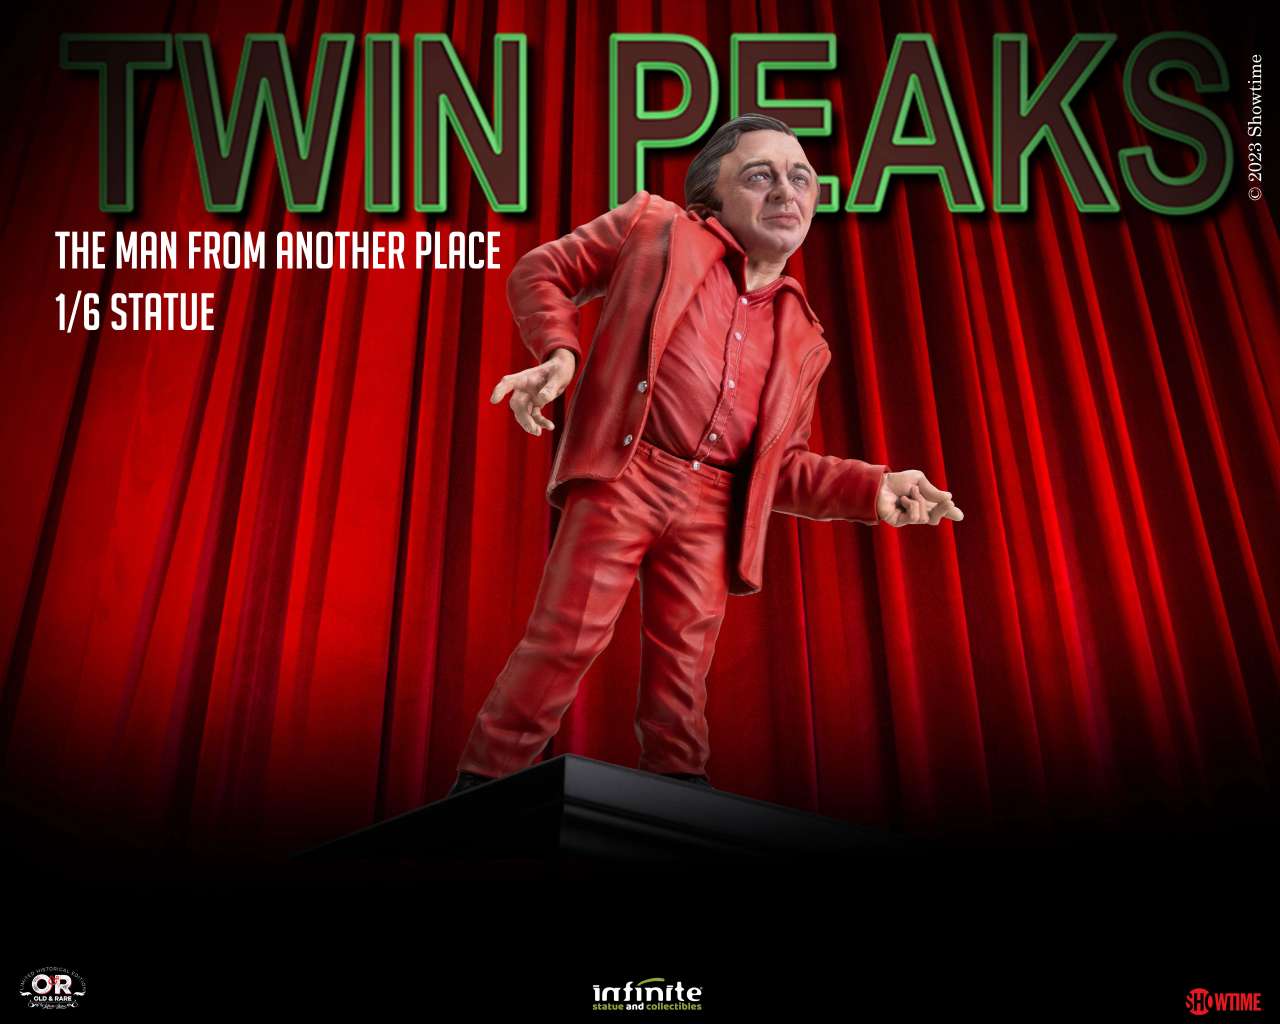 93682-TWIN PEAKS THE MAN FROM ANOTH PLA 1/6 ST